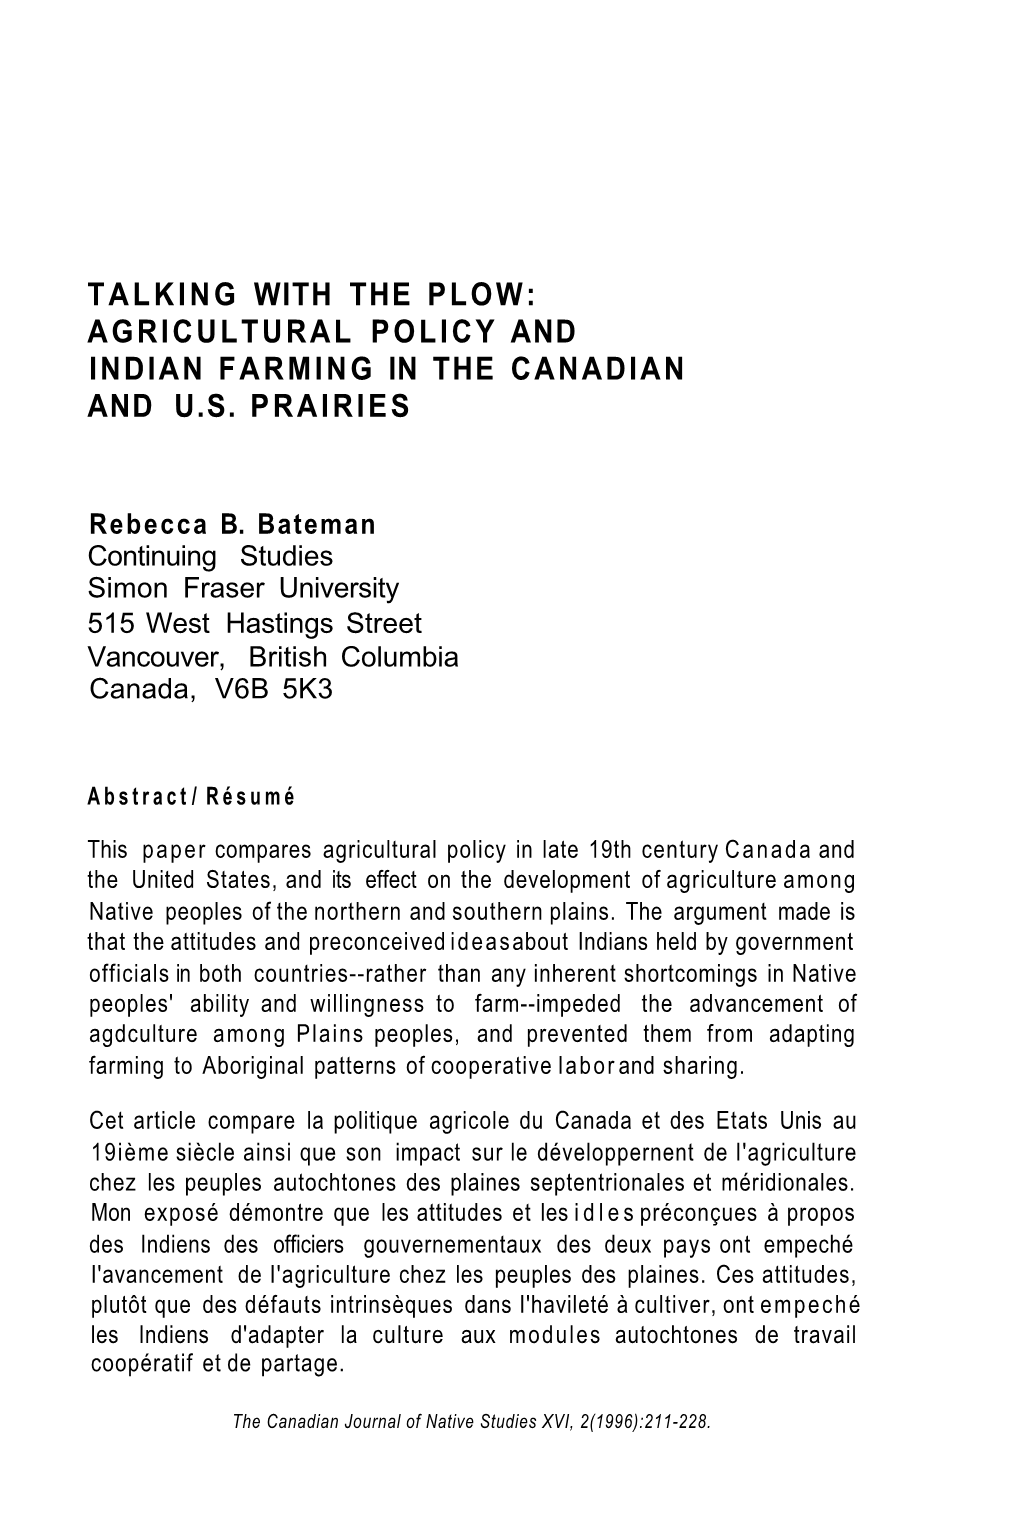 Talking with the Plow: Agricultural Policy and Indian Farming in the Canadian and U.S